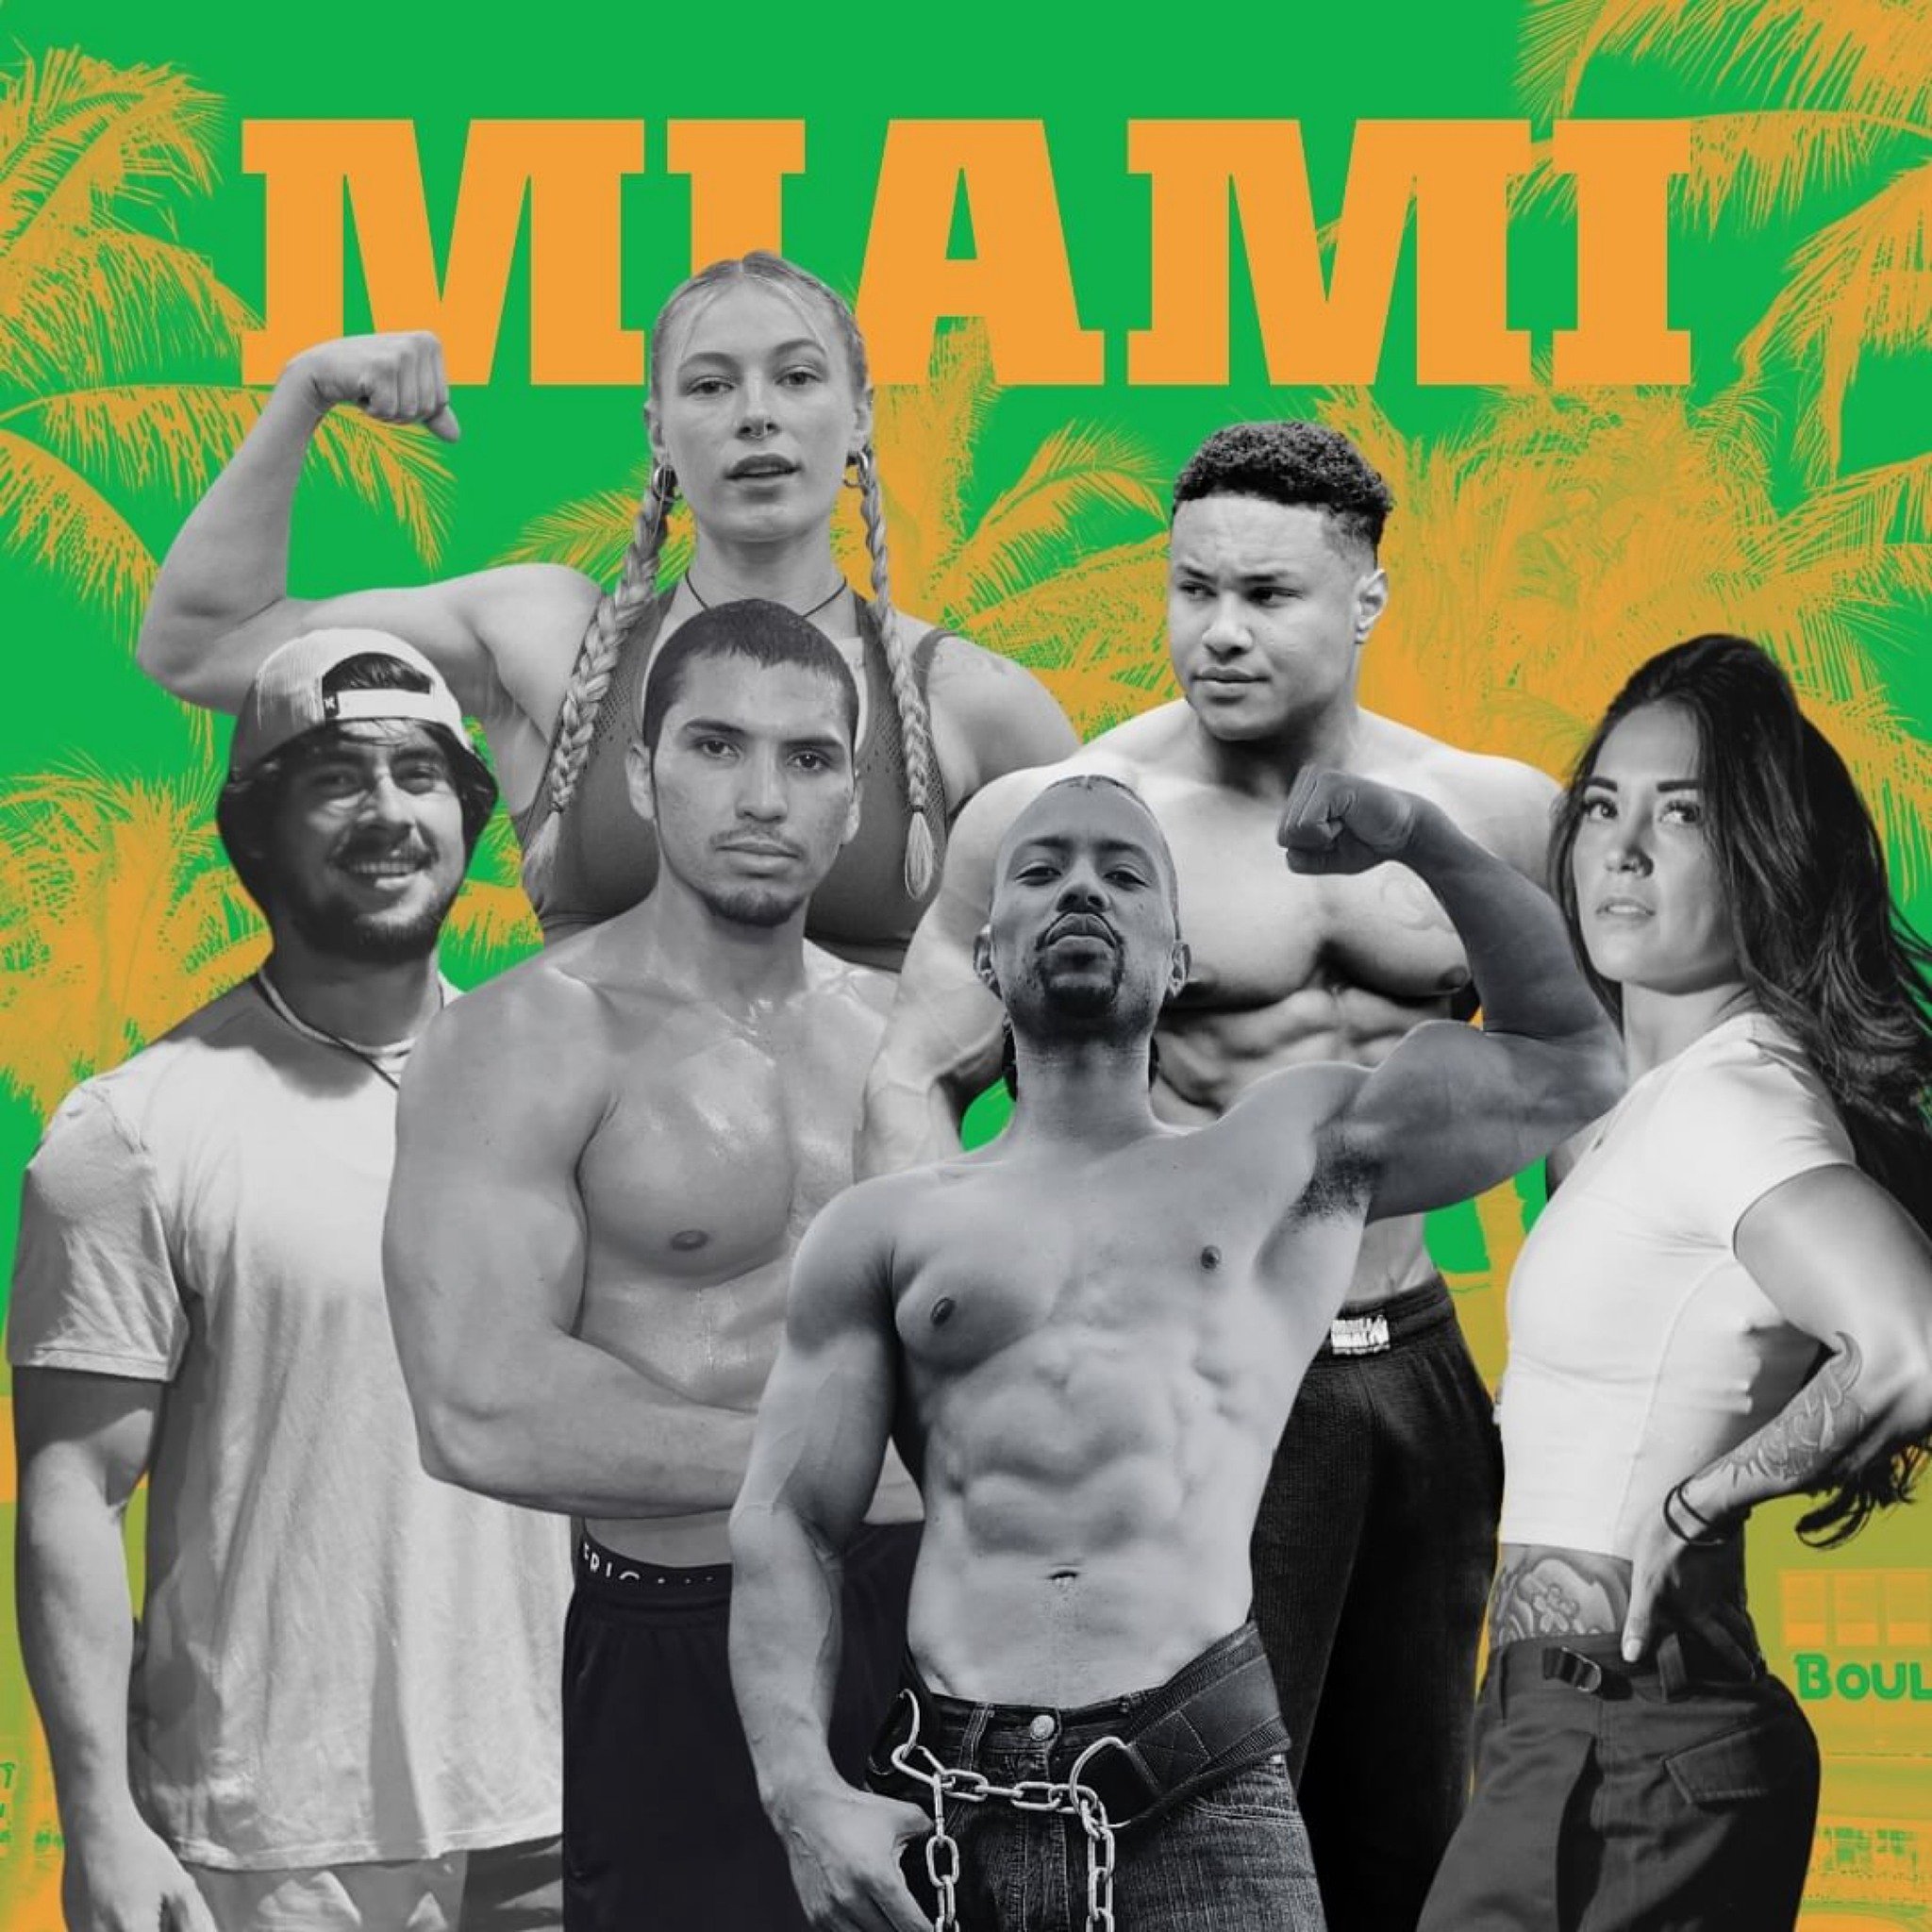 DOORS OPEN AT 6PM TODAY 🙌🏽
@miamibeachbandshell 

#Repost @ufxleague
・・・
Team Miami 🔥 It&rsquo;s on. Come see them battle @ufxprola today at the Miami Beach Bandshell. Doors open at 6 and show starts at 7. Get your tickets at ufxpro.com or at the 